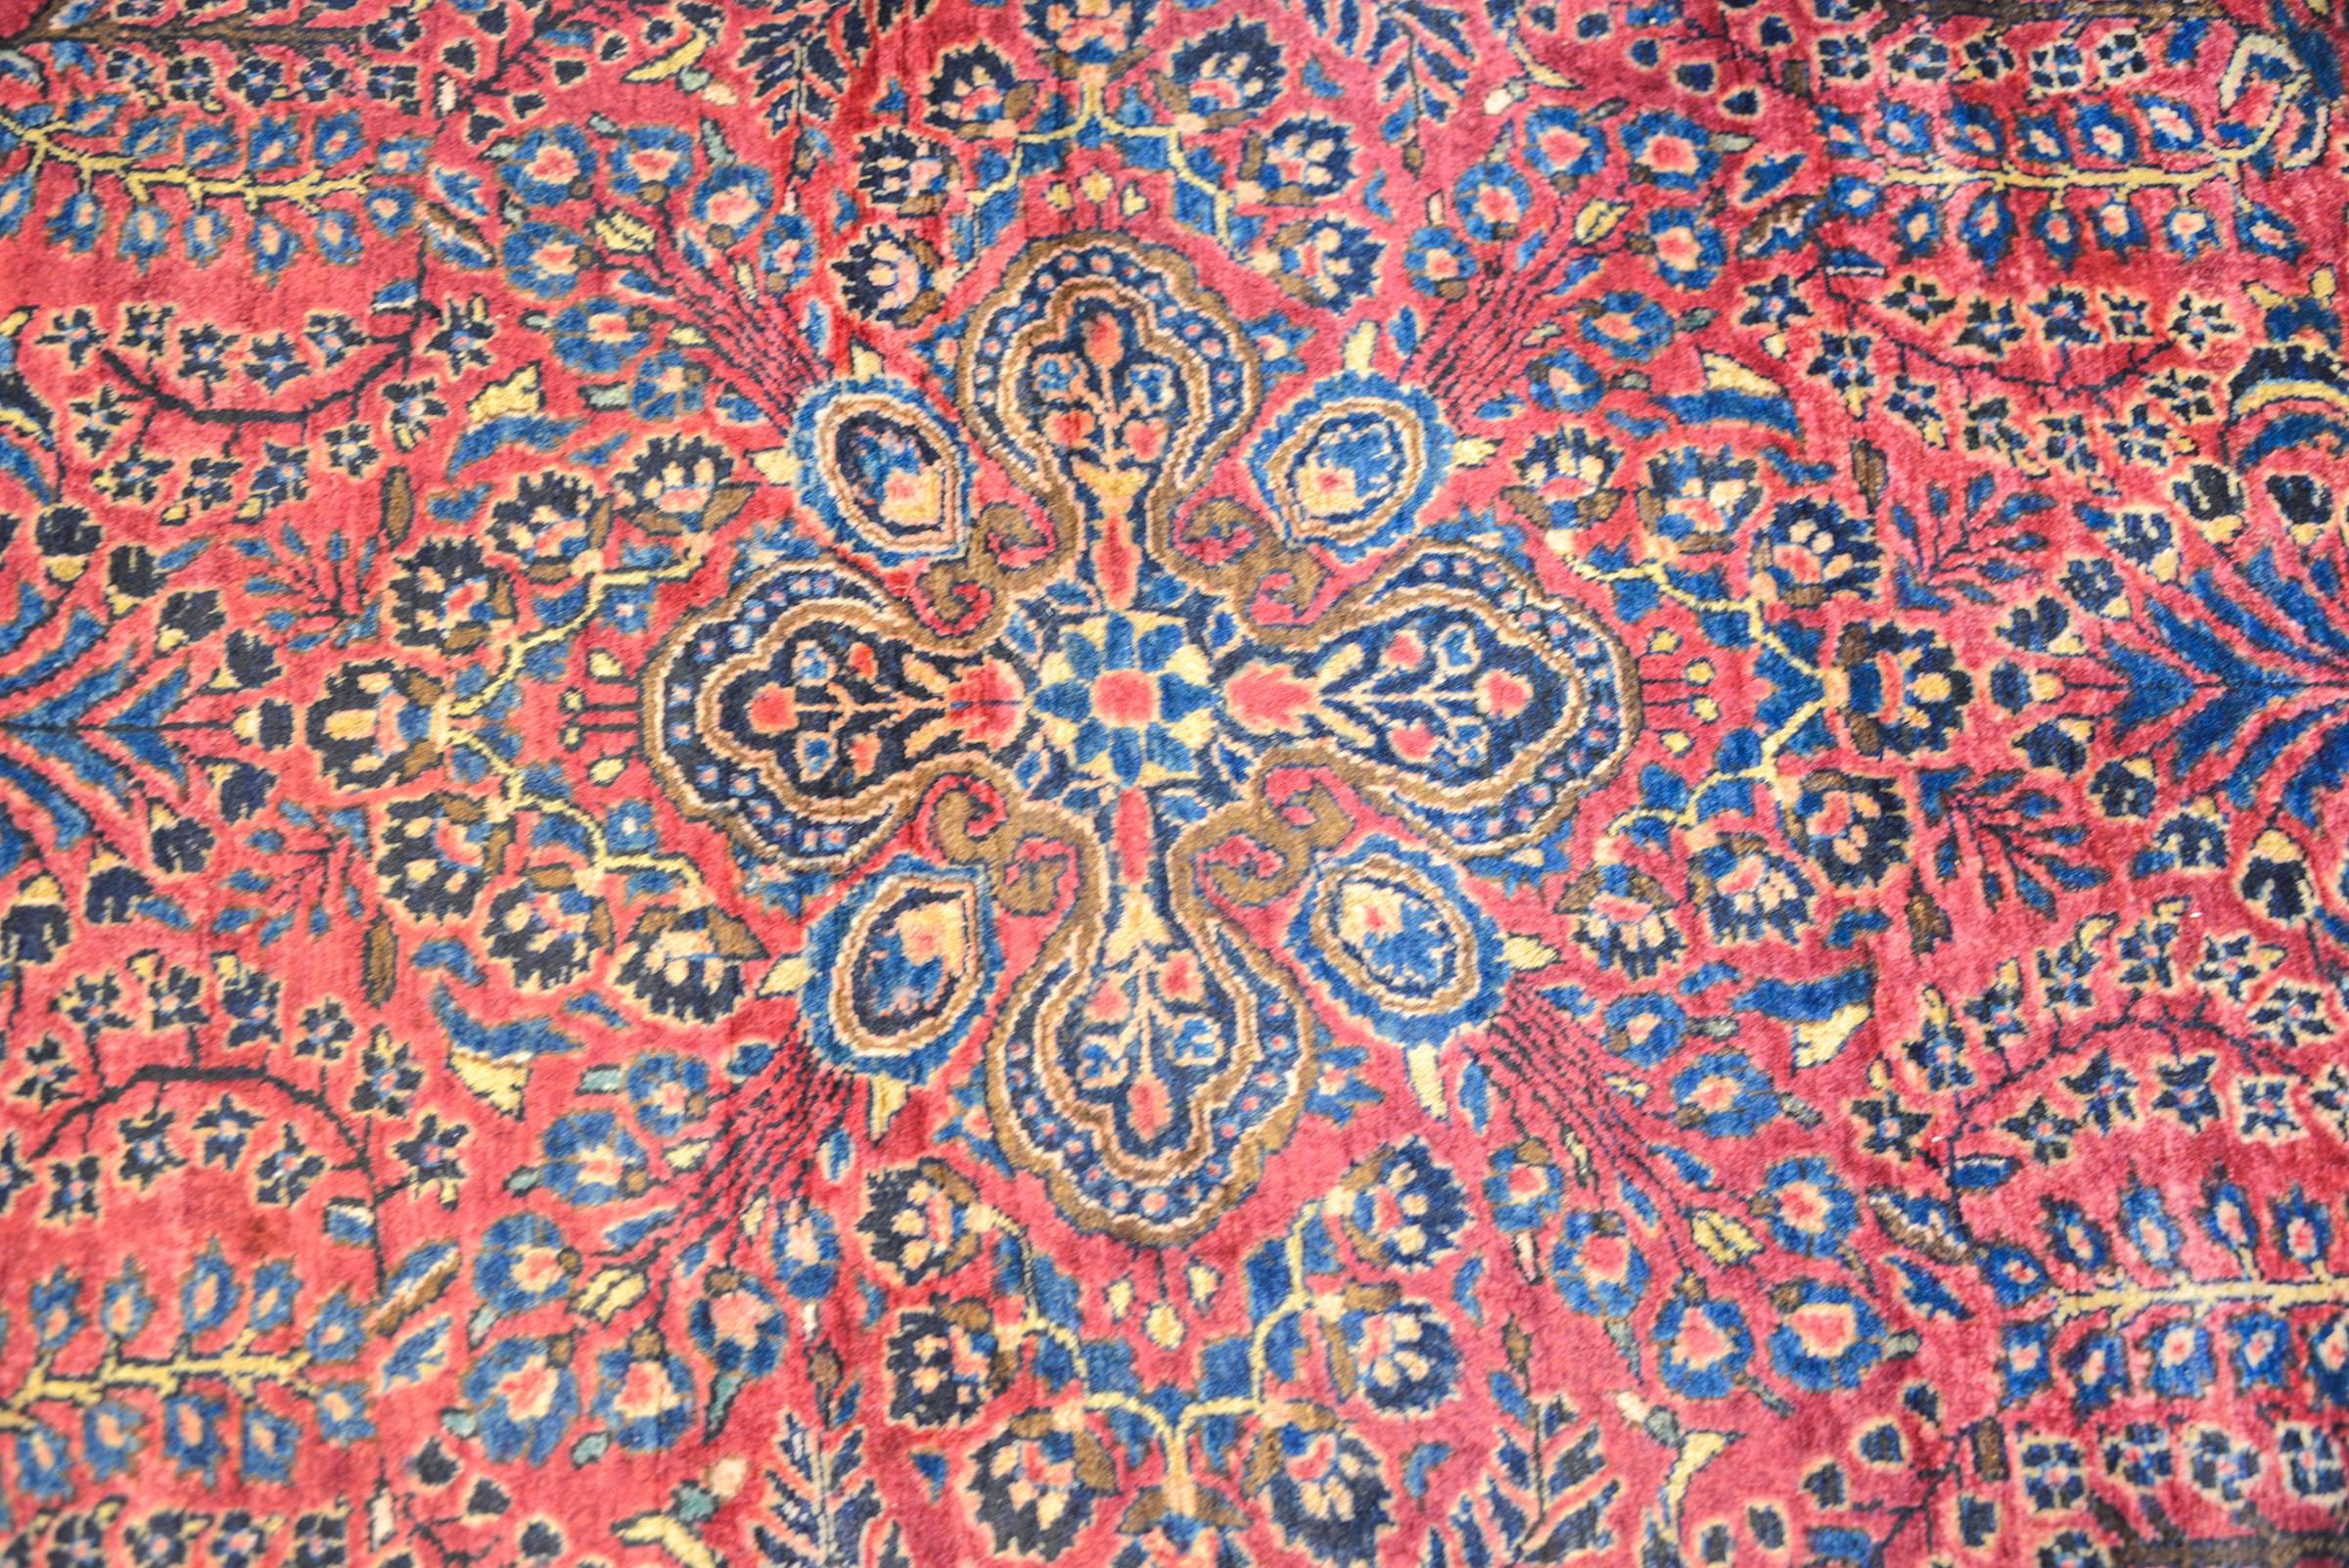 A wonderful early 20th century Persian Sarouk Maharajan rug with an exquisite all-over mirrored floral and tree-of-life pattern woven in multicolored vegetable dyed wool on a cranberry background. The border is complex with multiple wide and narrow